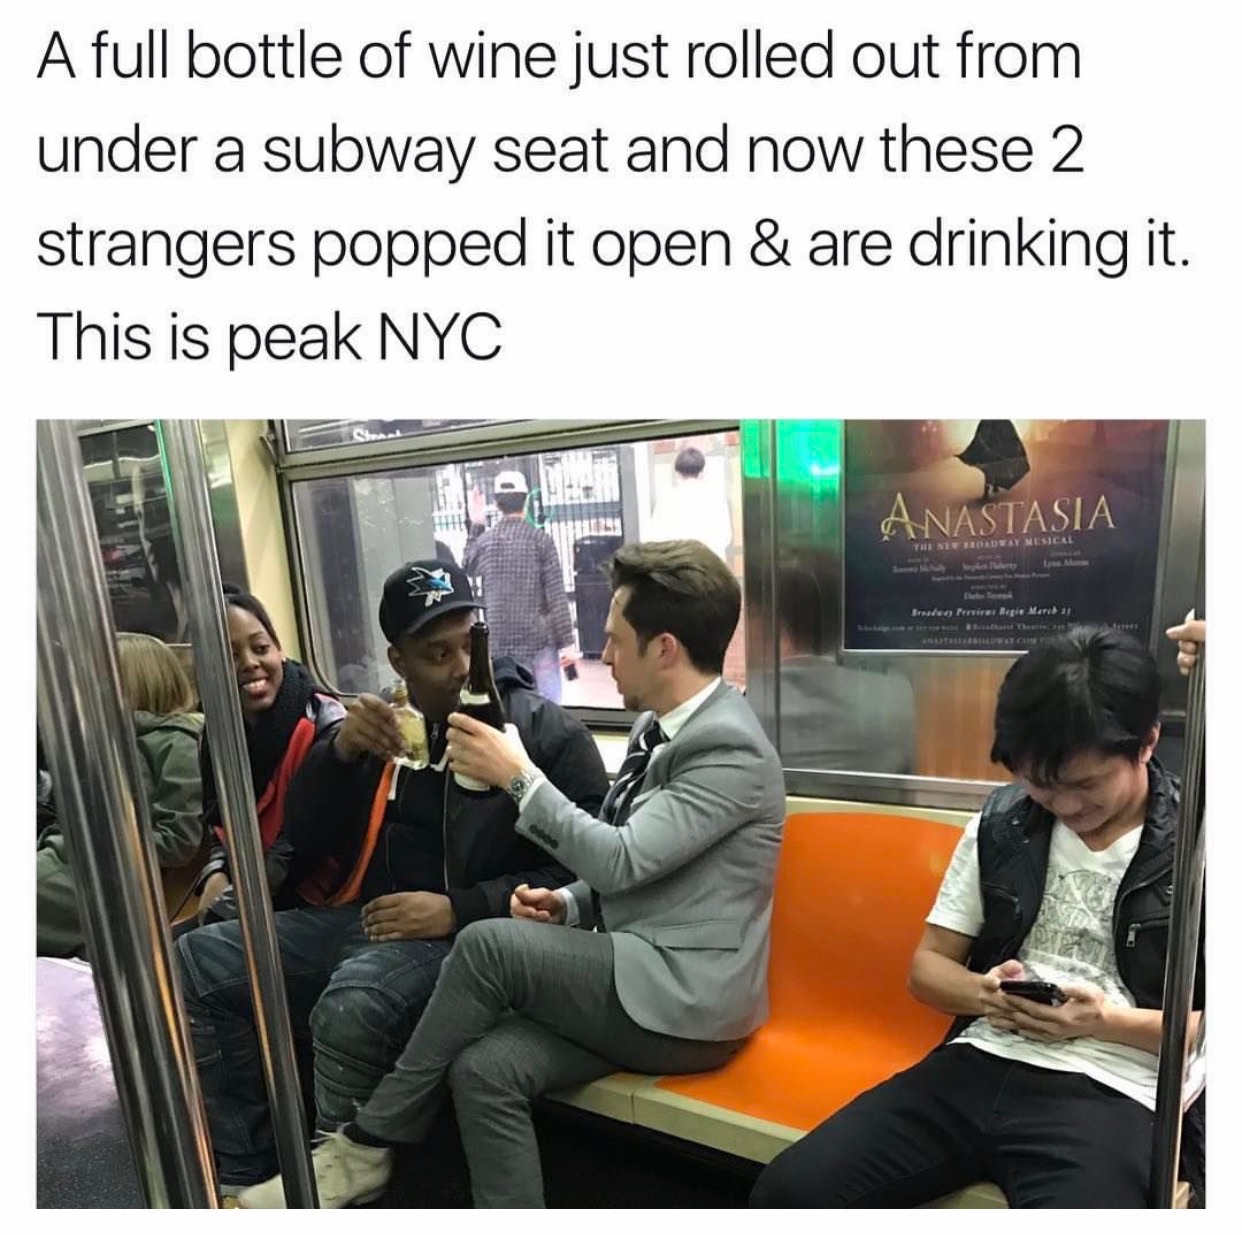 bottle of wine nyc subway - A full bottle of wine just rolled out from under a subway seat and now these 2 strangers popped it open & are drinking it. This is peak Nyc Anastasia Beords Mesical Erede freirer Rege Mar 21